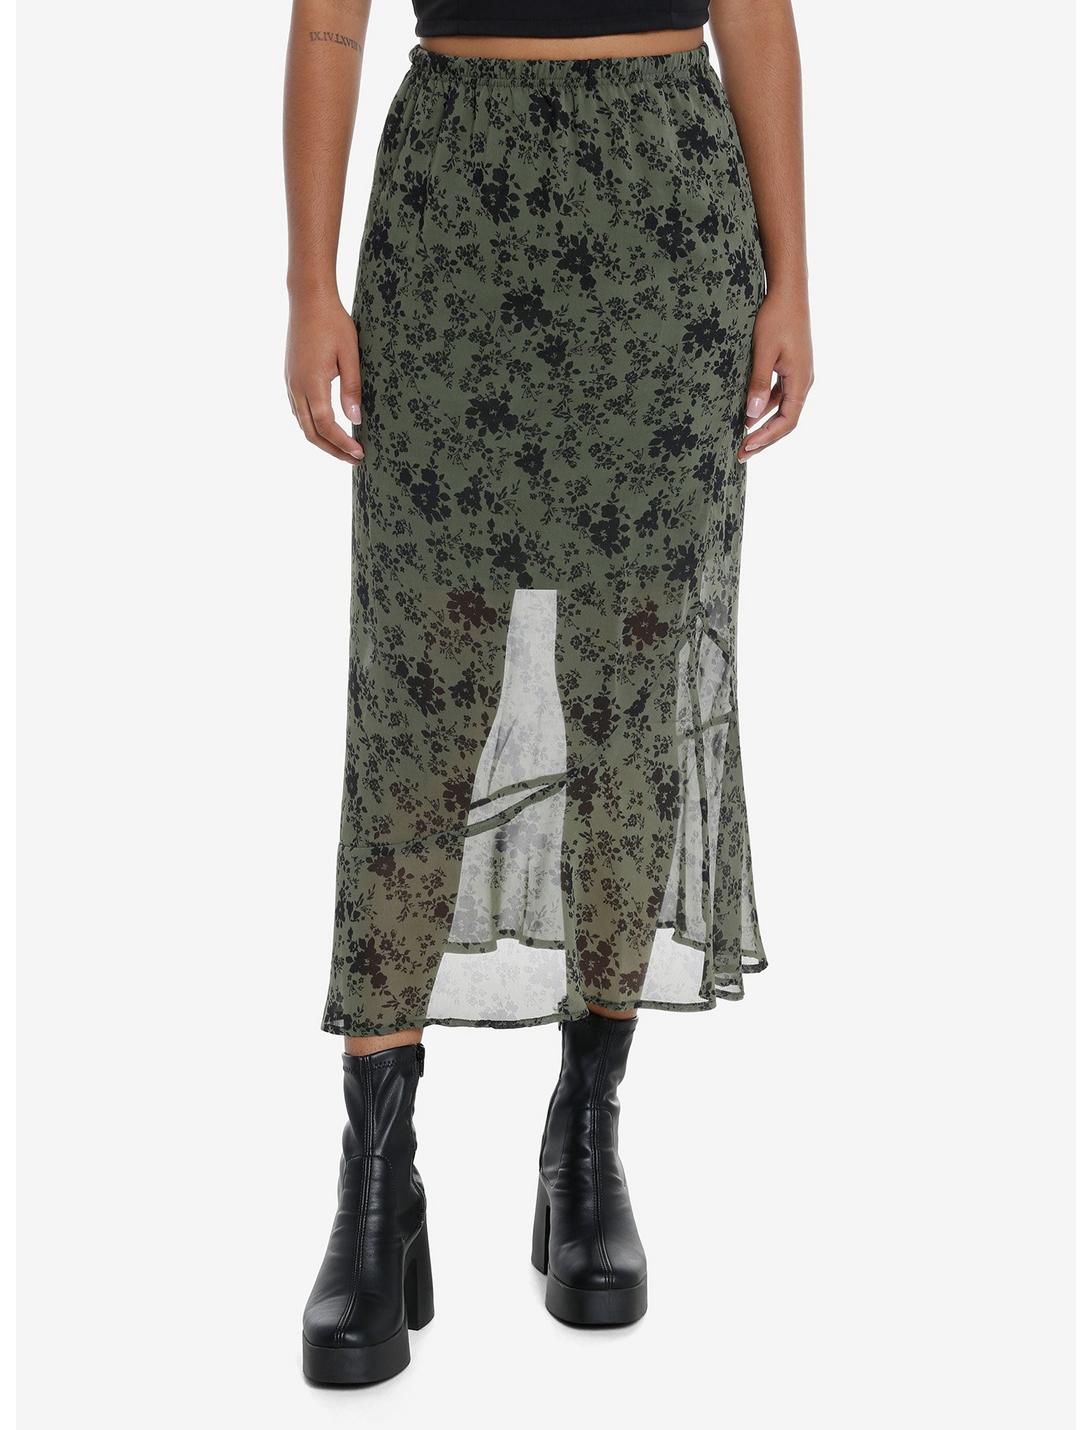 Social Collision Olive Floral Mesh Midi Skirt | Hot Topic